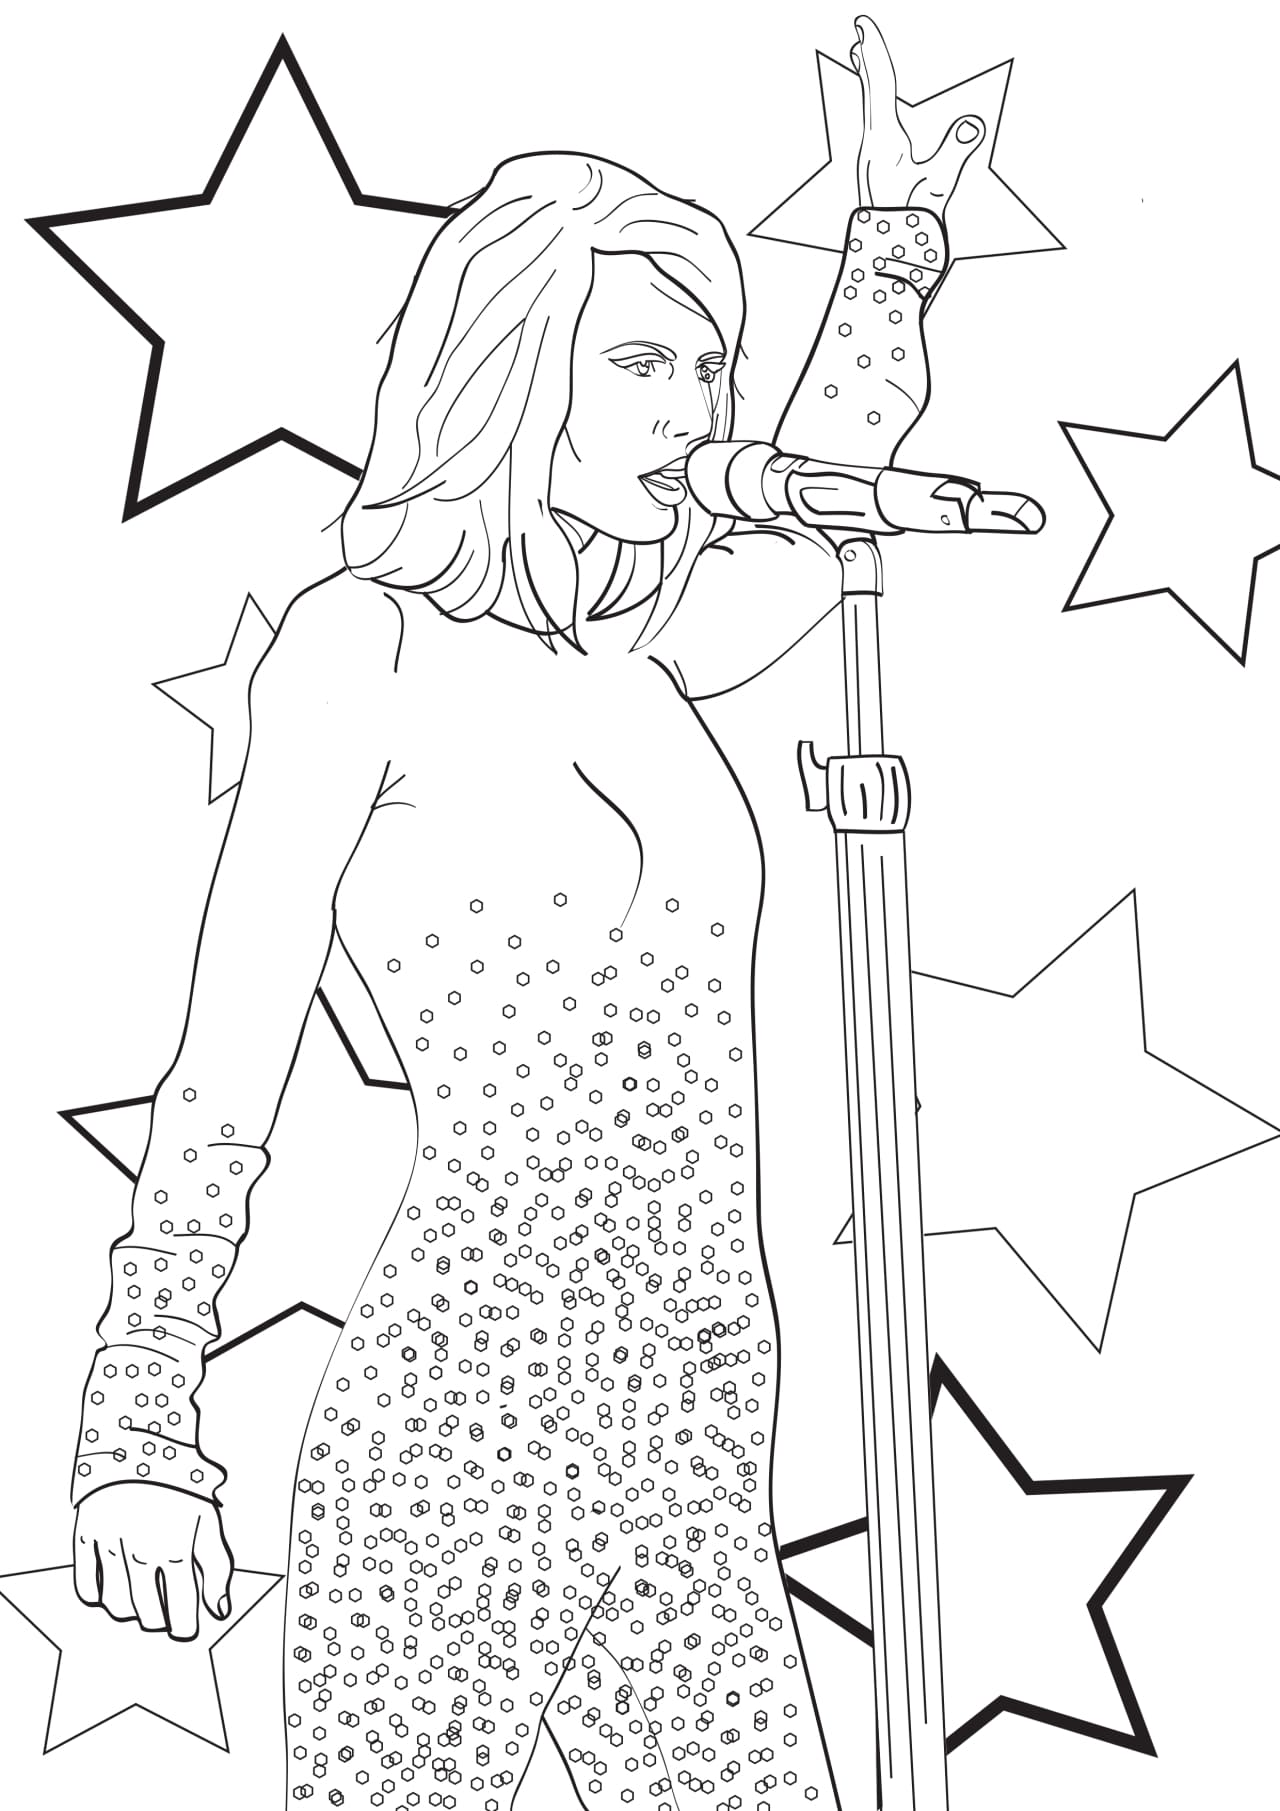 Taylor Swift Singing Image For Children Coloring Page